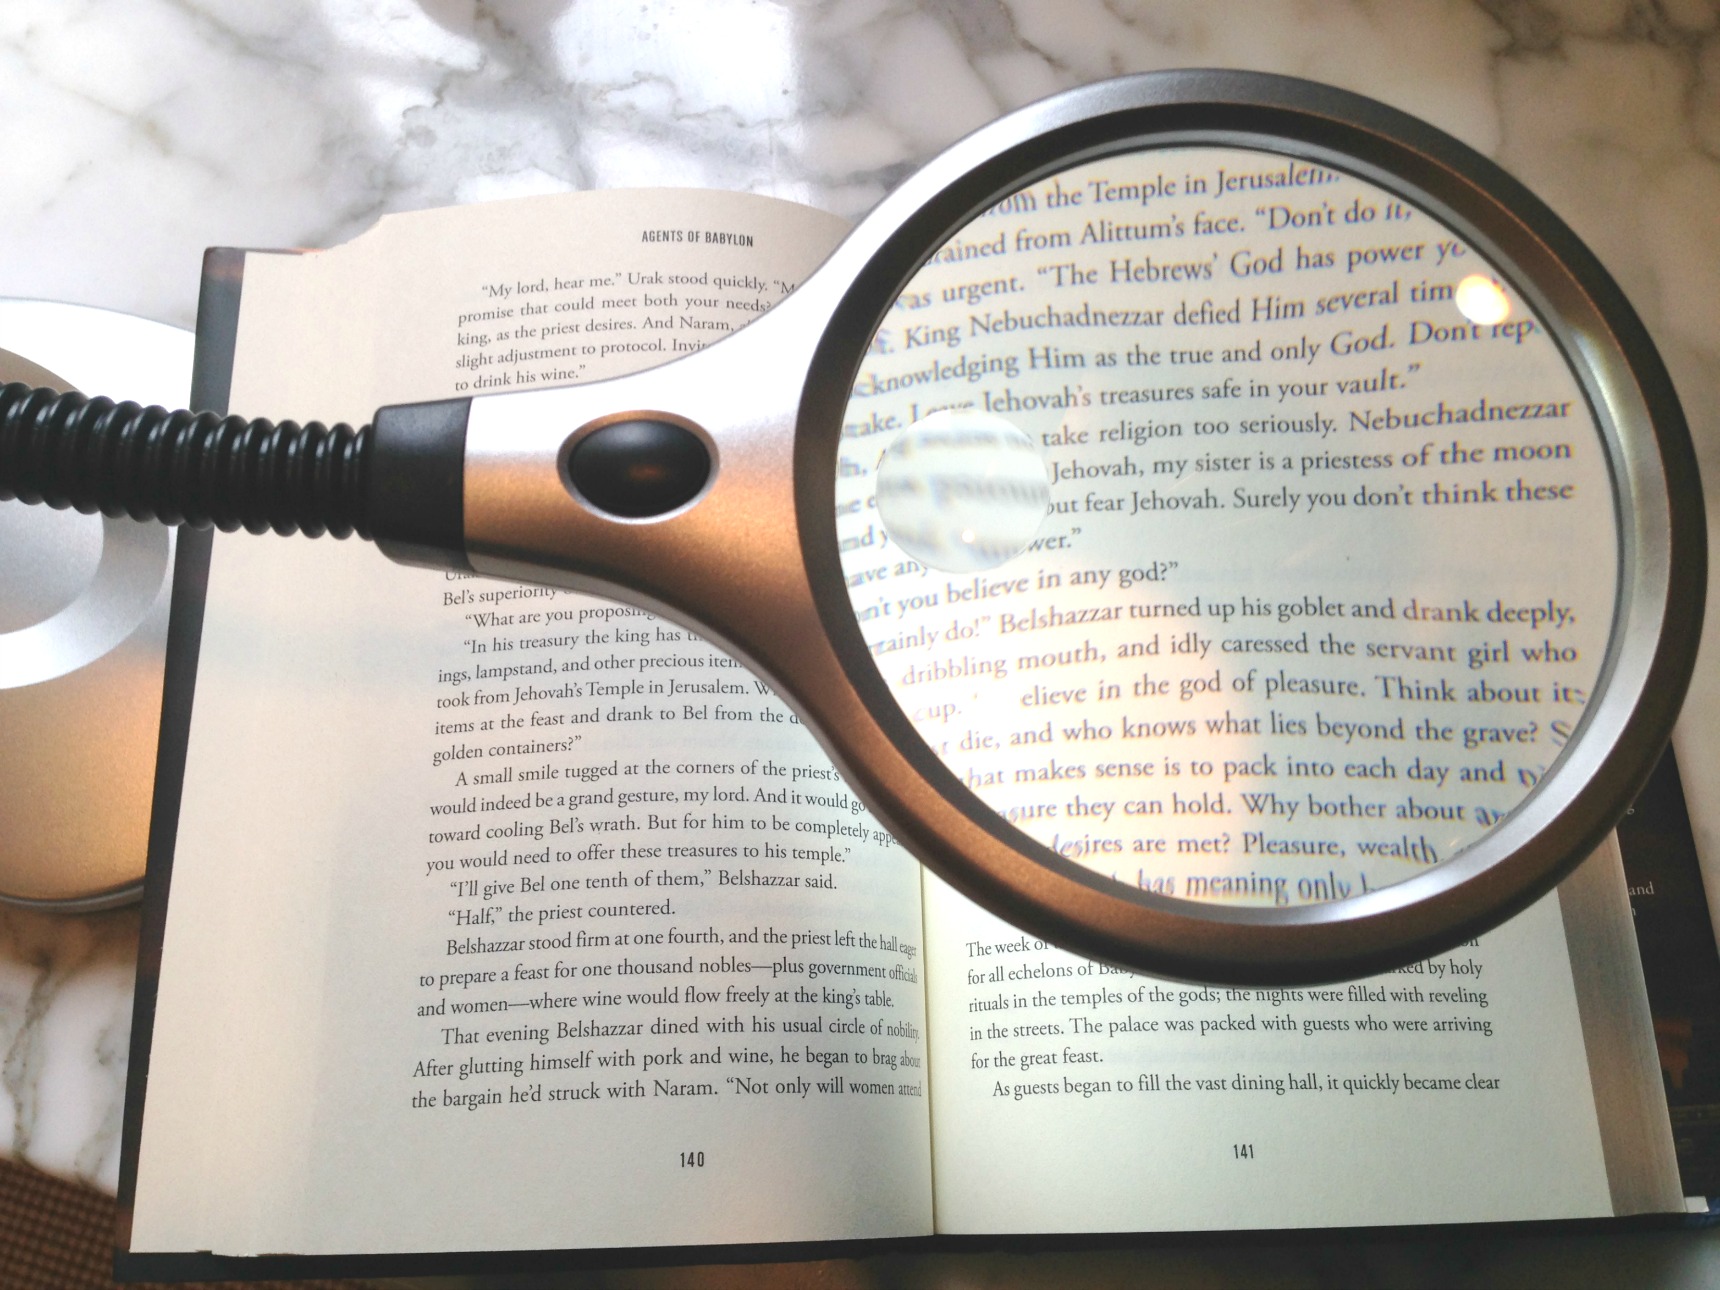 Magnifying Glasses for Low Vision and Other Uses - All About Vision